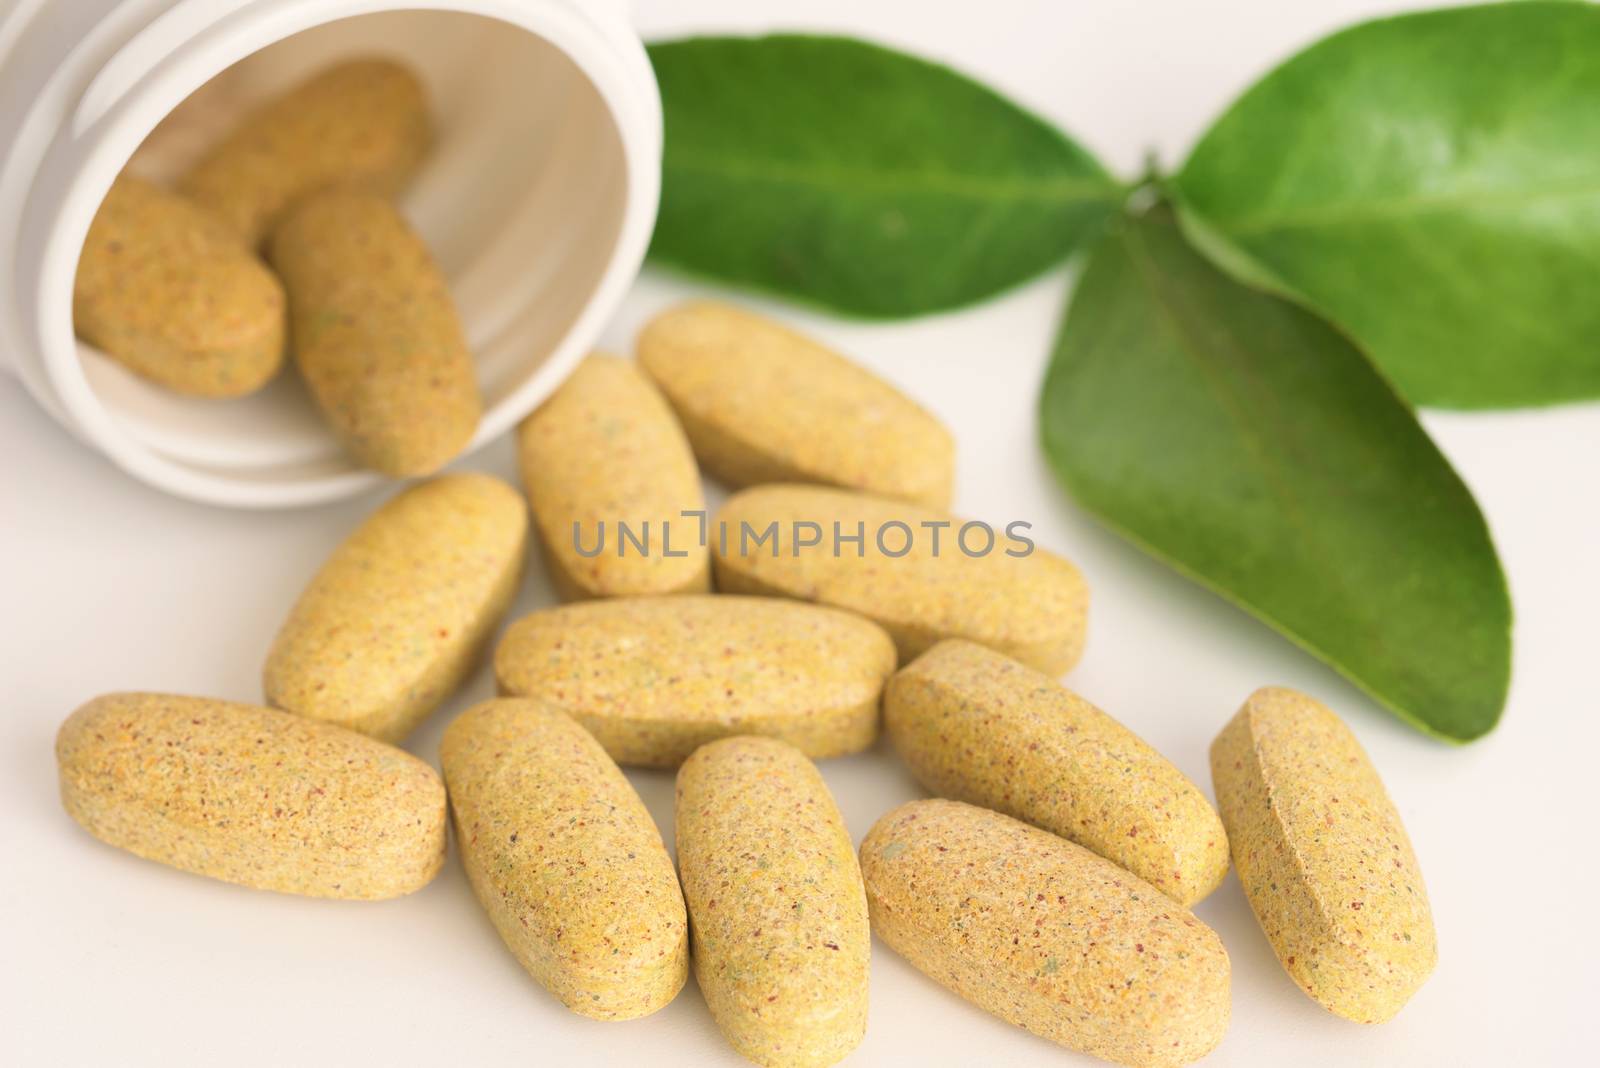 Herbal medicine in capsules. Nutritional supplements. Vitamins supplements